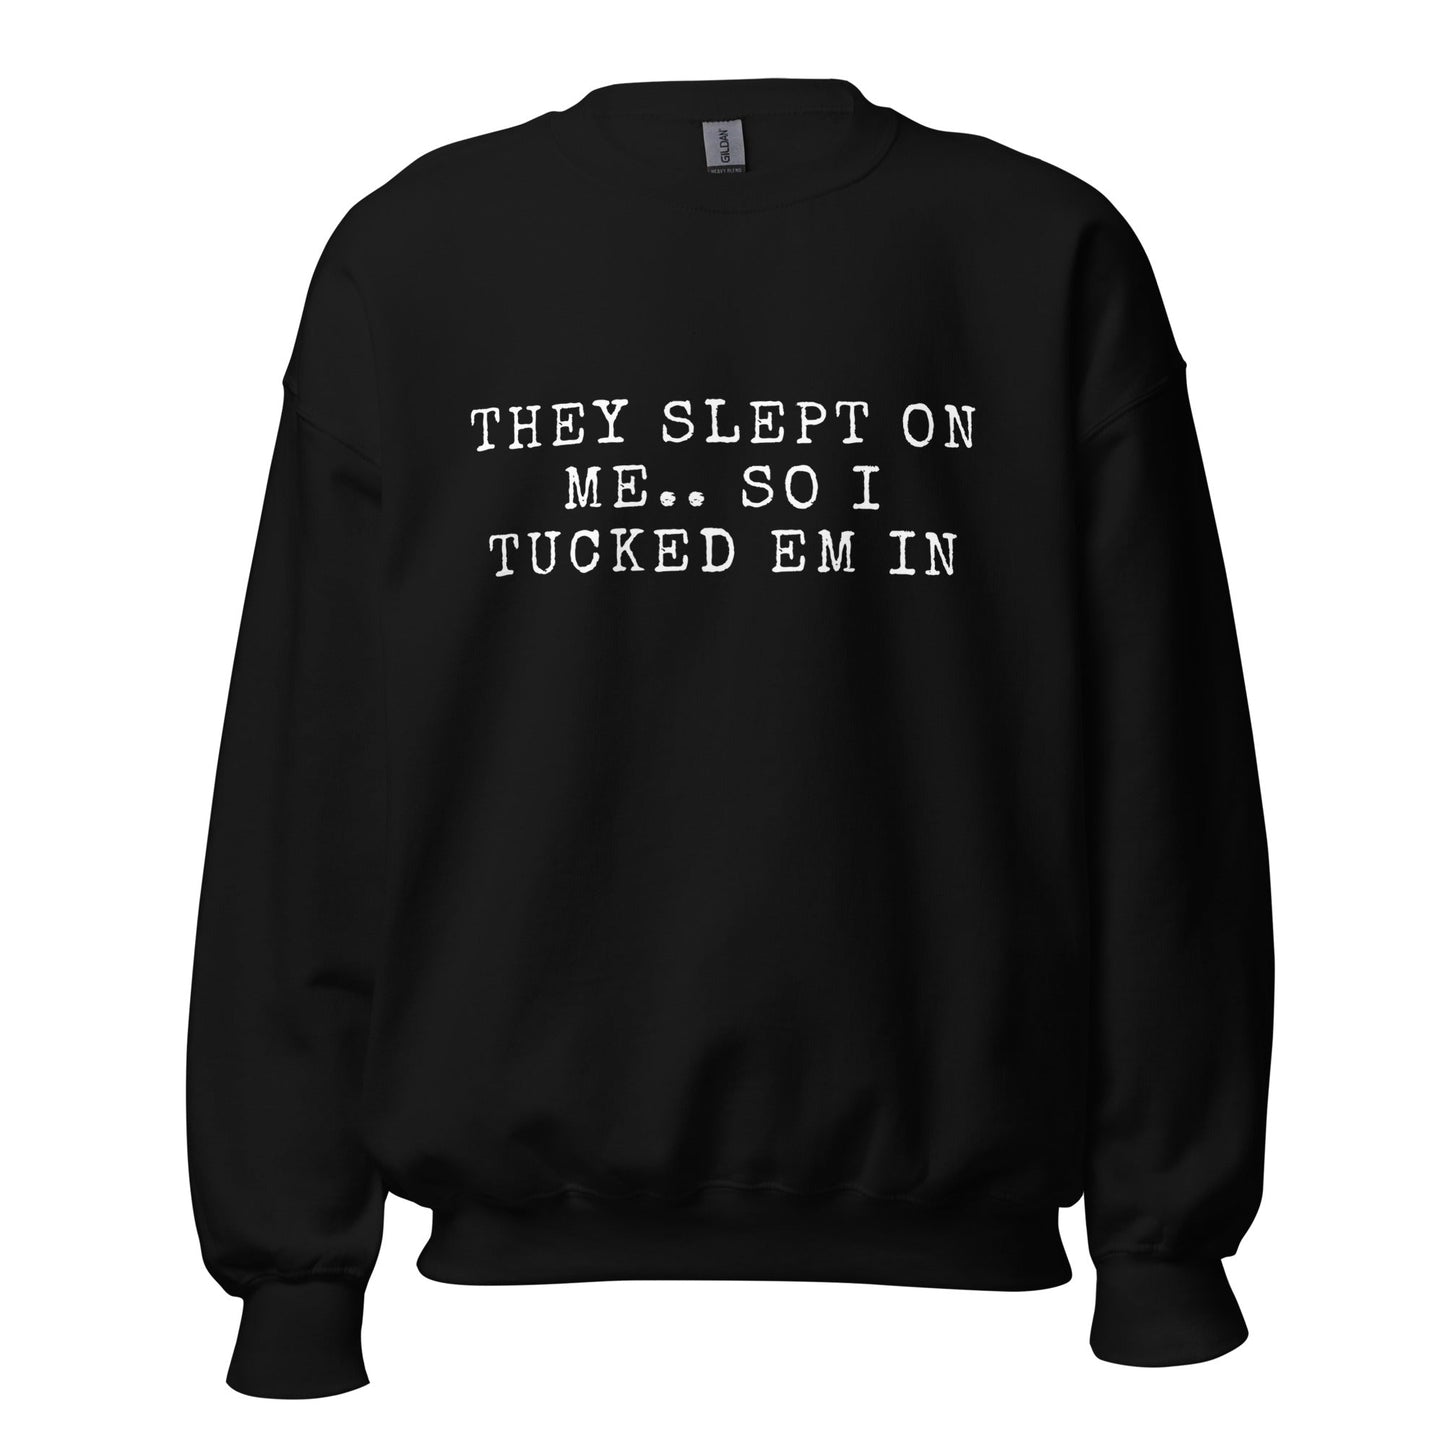 THEY SLEPT ON ME.. SO I TUCKED EM IN - Unisex Sweatshirt (SUGGEST TO ORDER A SIZE DOWN - SIZE CHART BELOW) - Catch This Tea Shirts